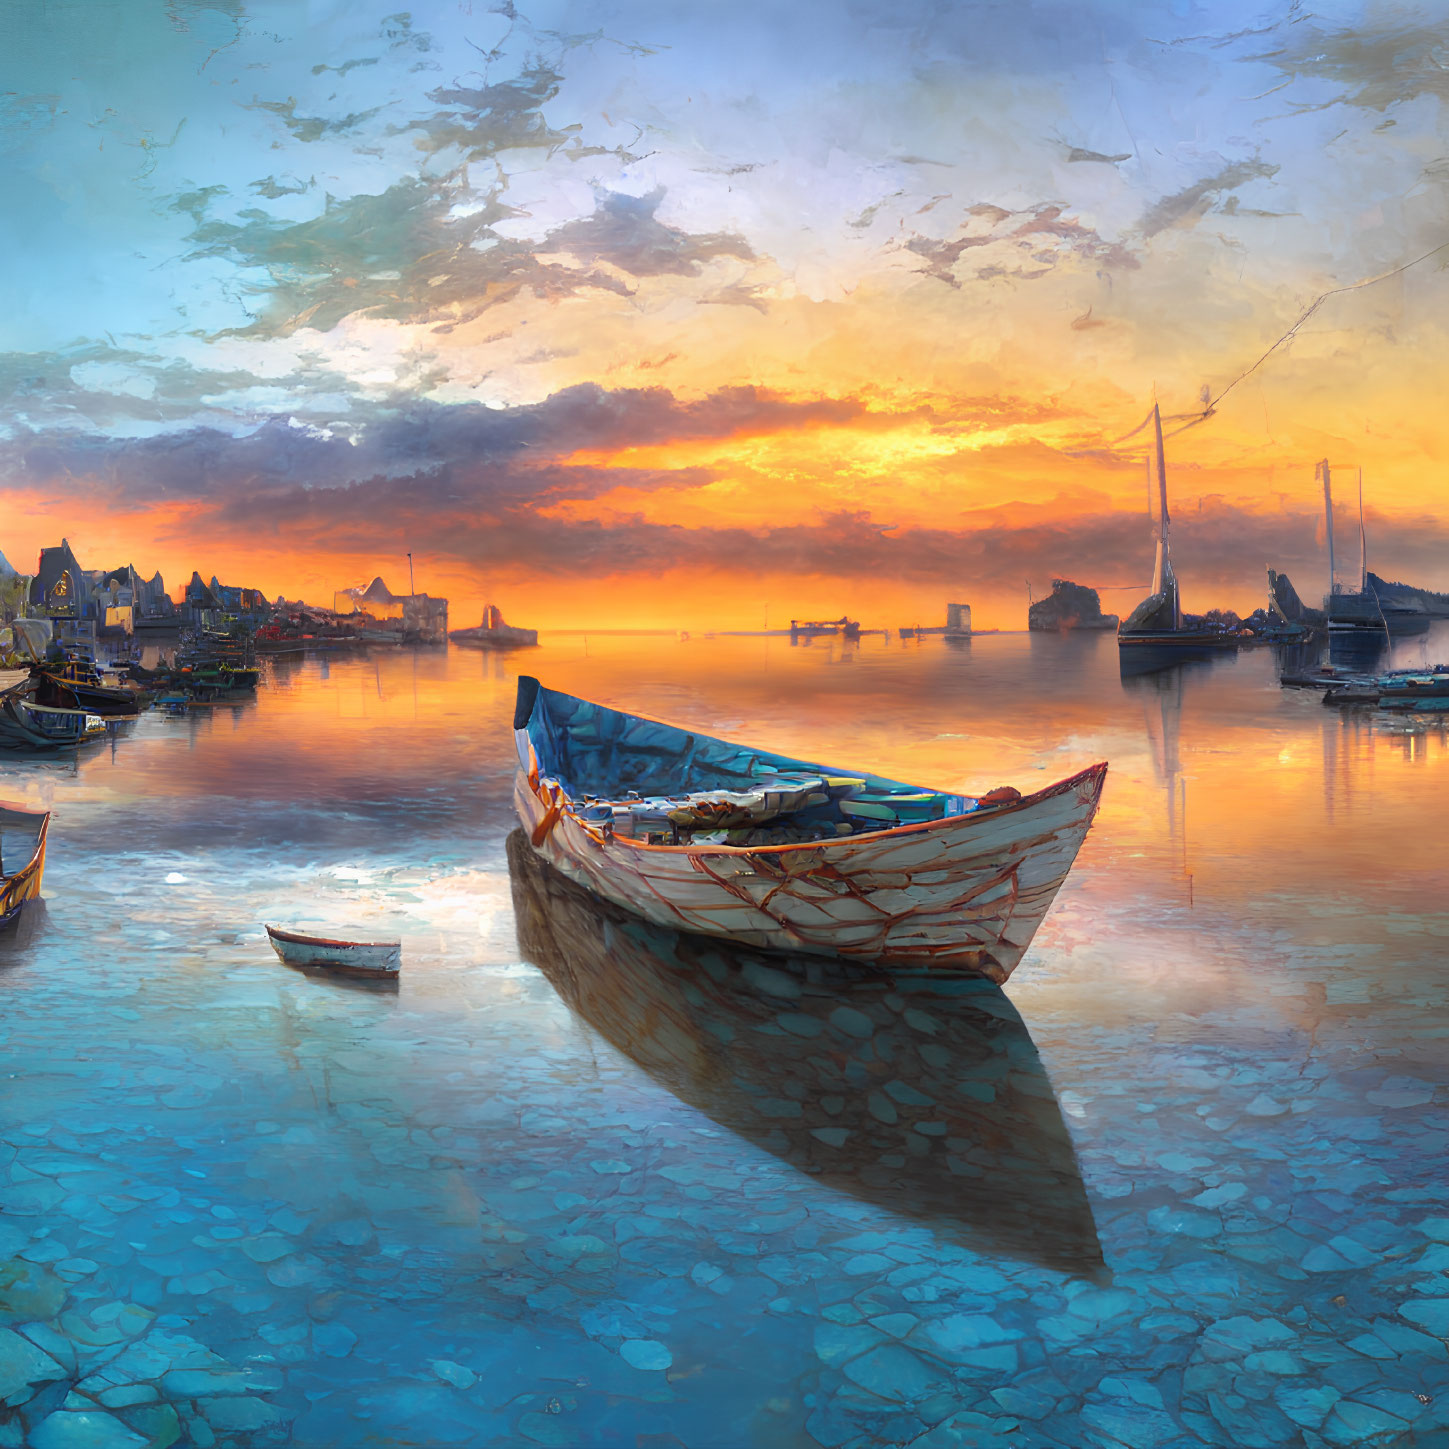 Tranquil sunset harbor scene with rowboat, calm water, ships, and buildings